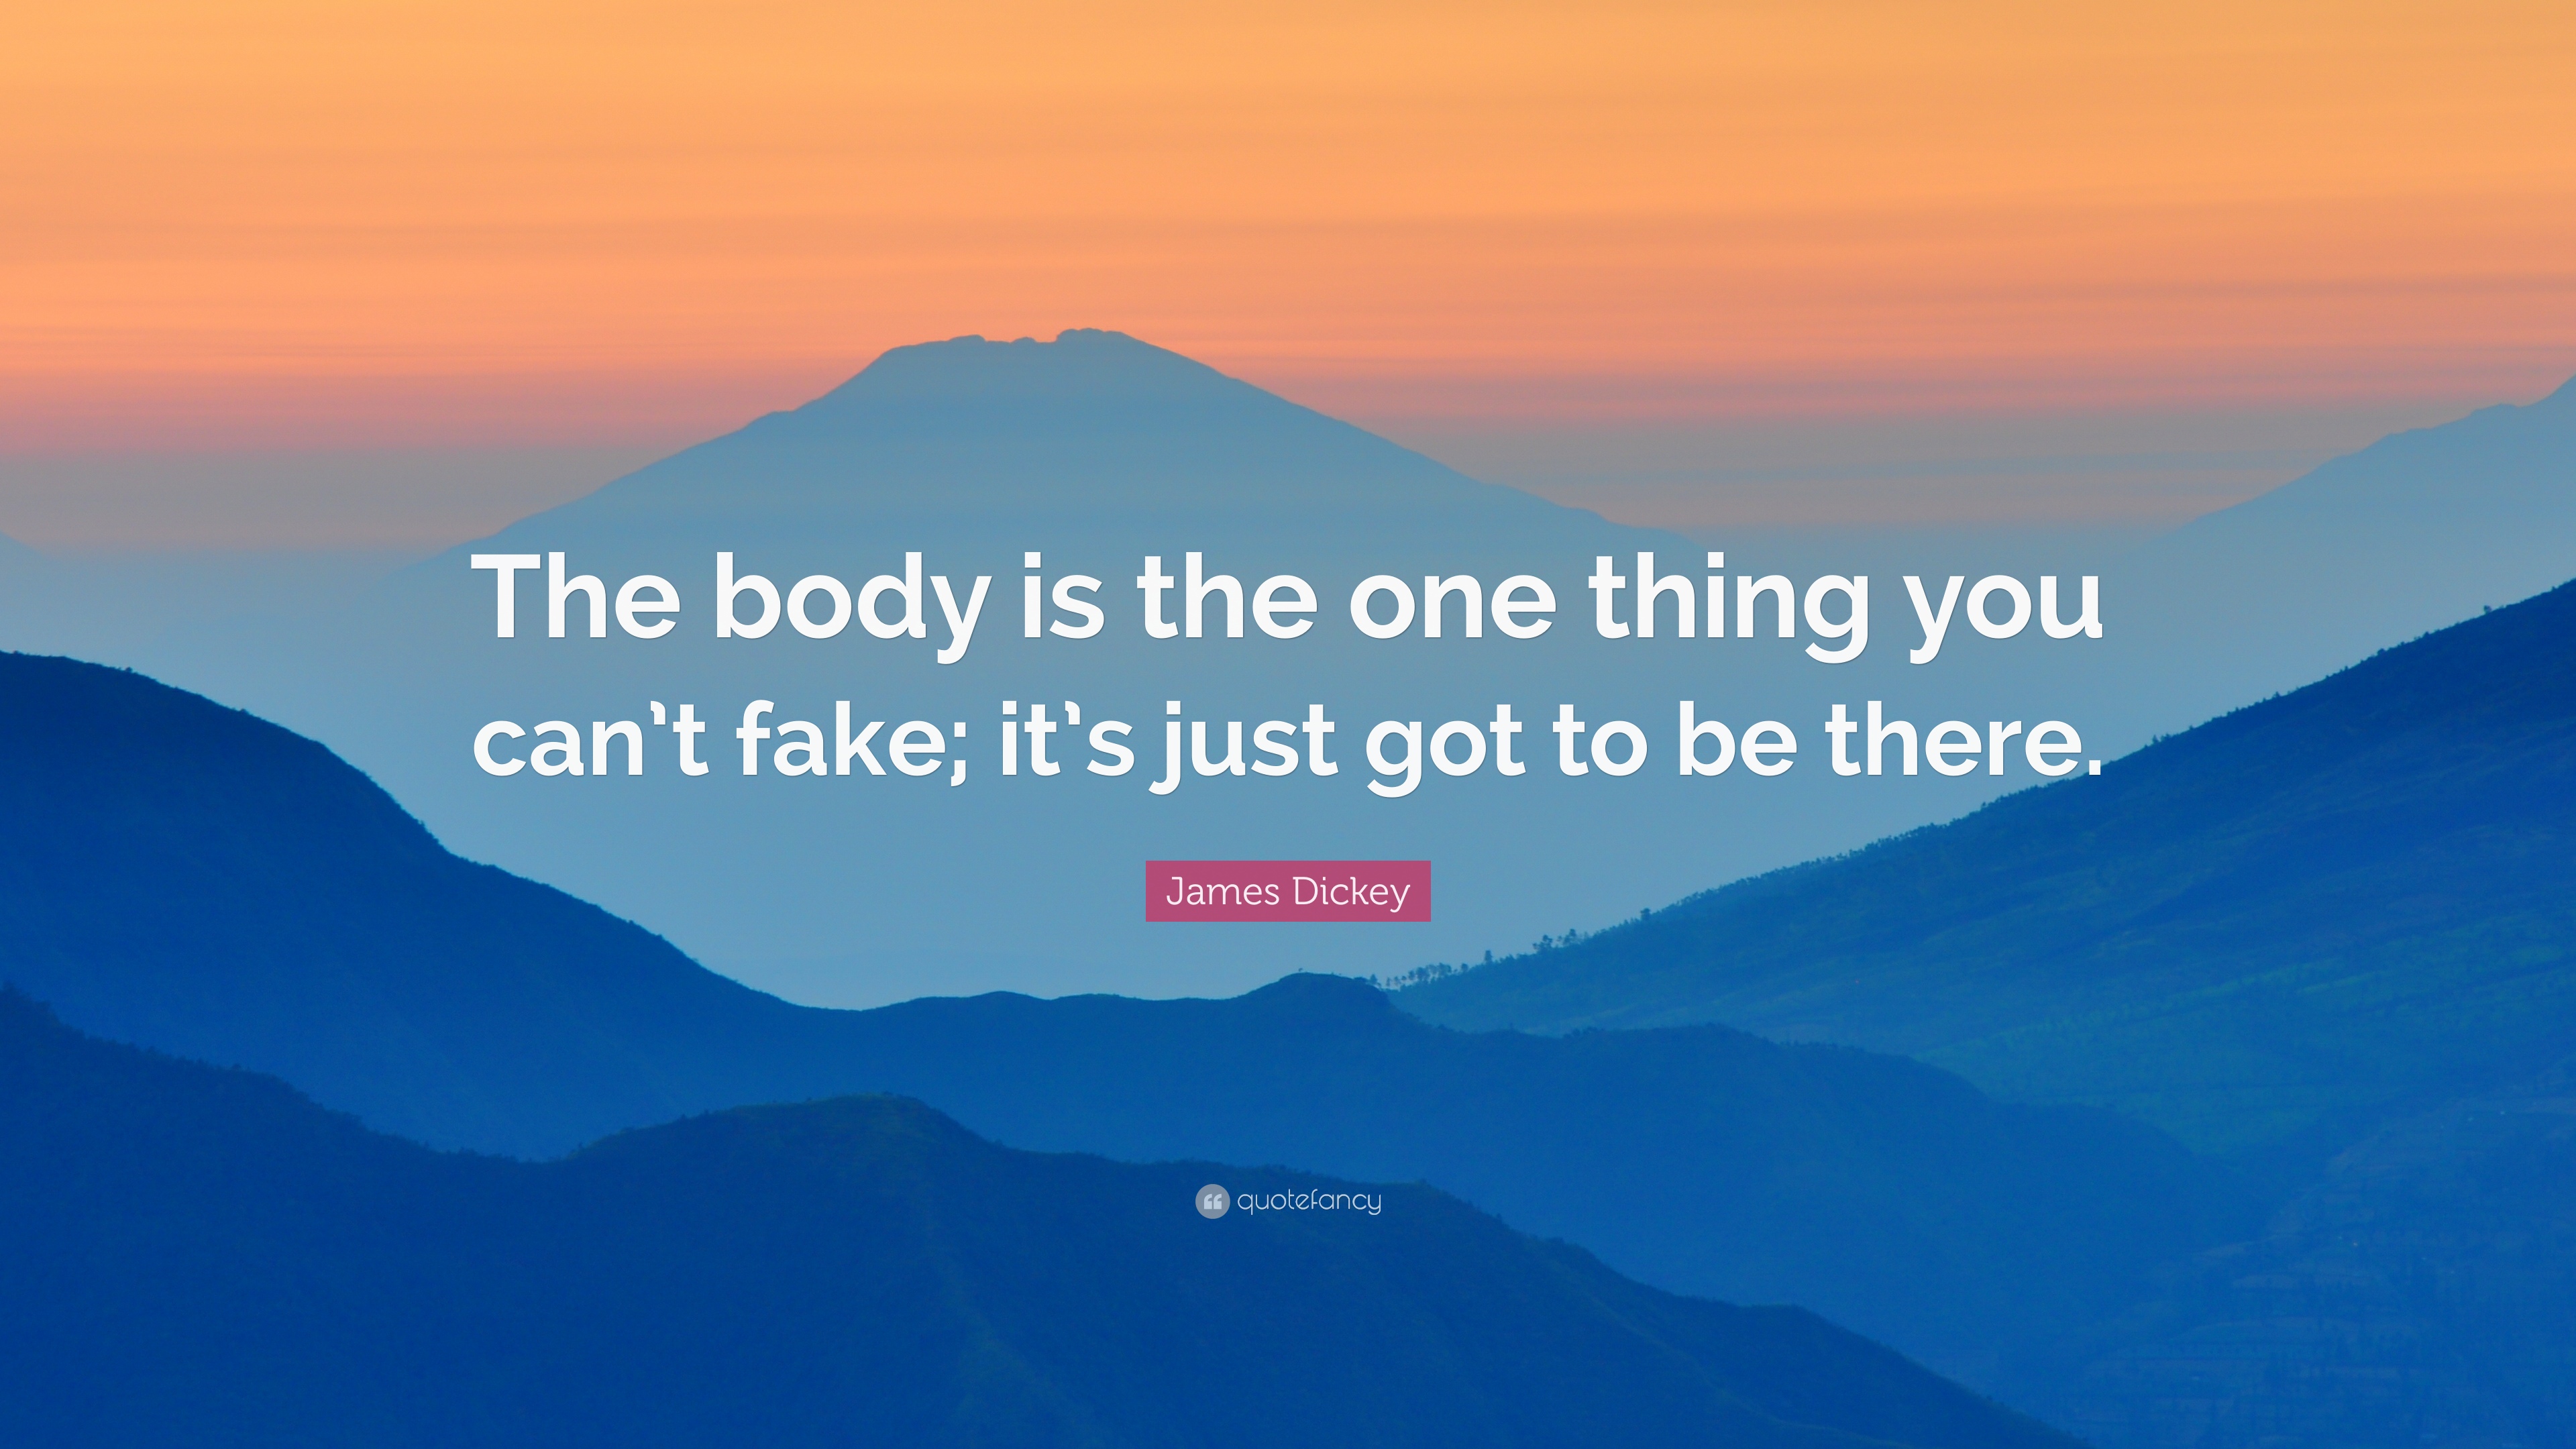 Quotefancy-The Body is the one thing you Cant Fake, has to be there.